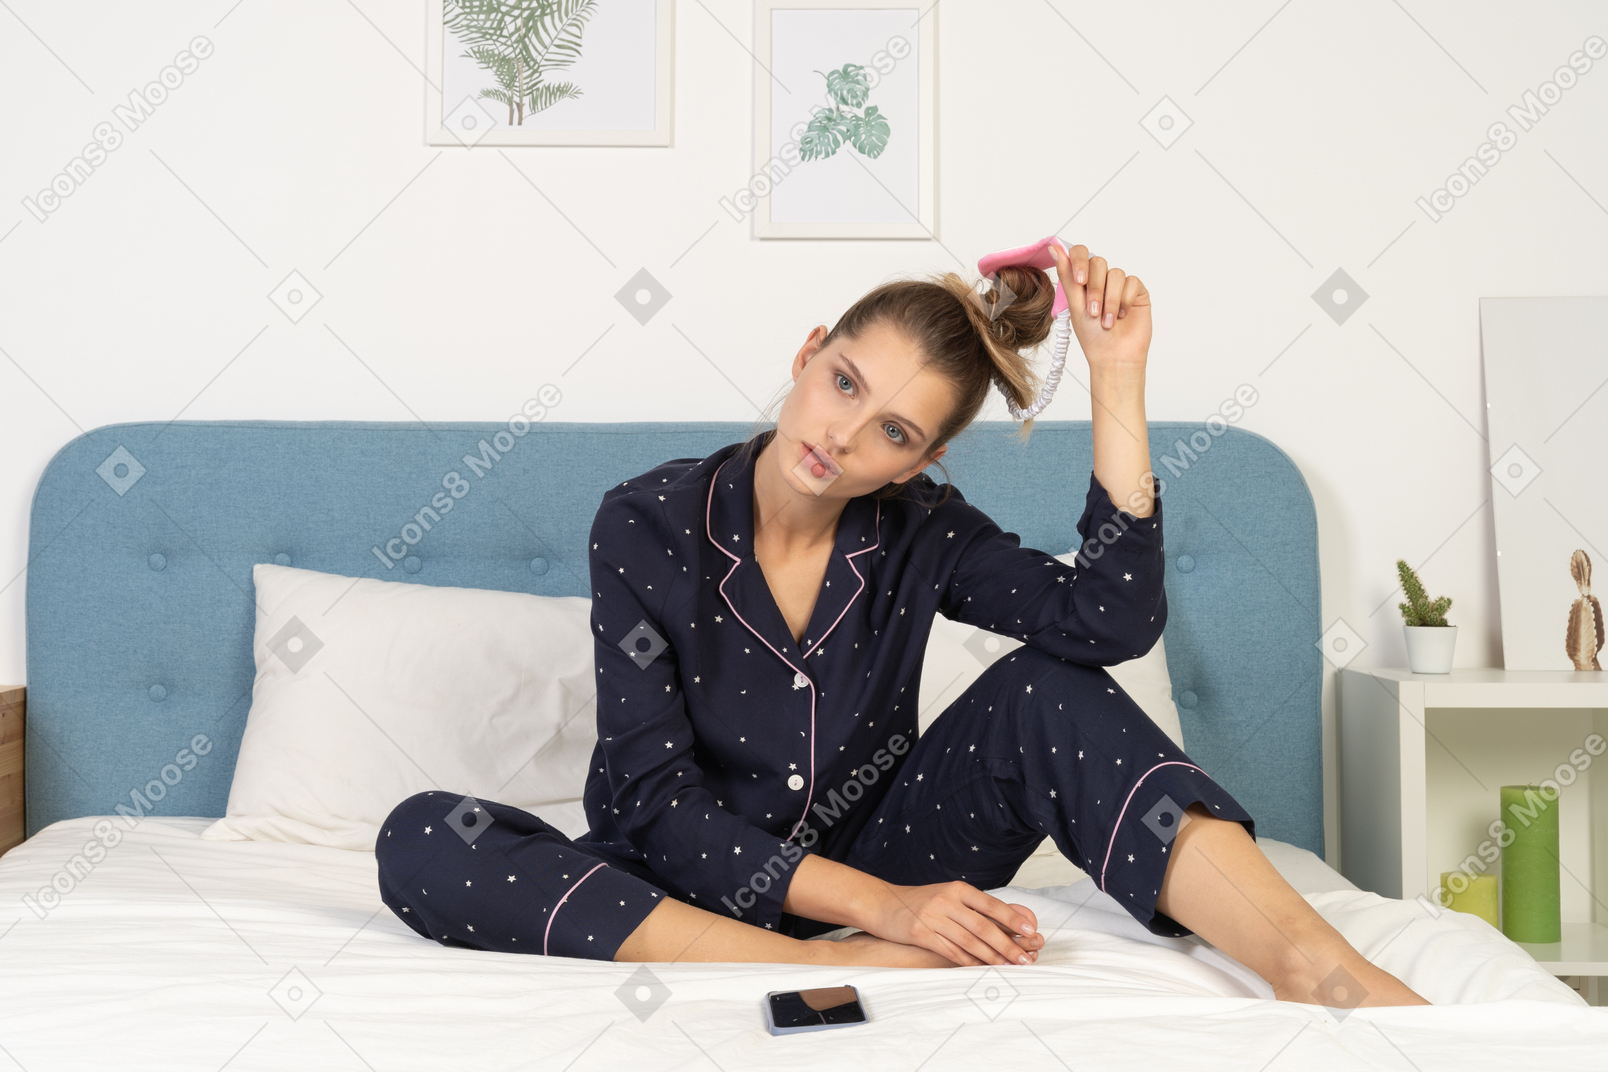 Front view of a young lady in pajamas sitting on bed